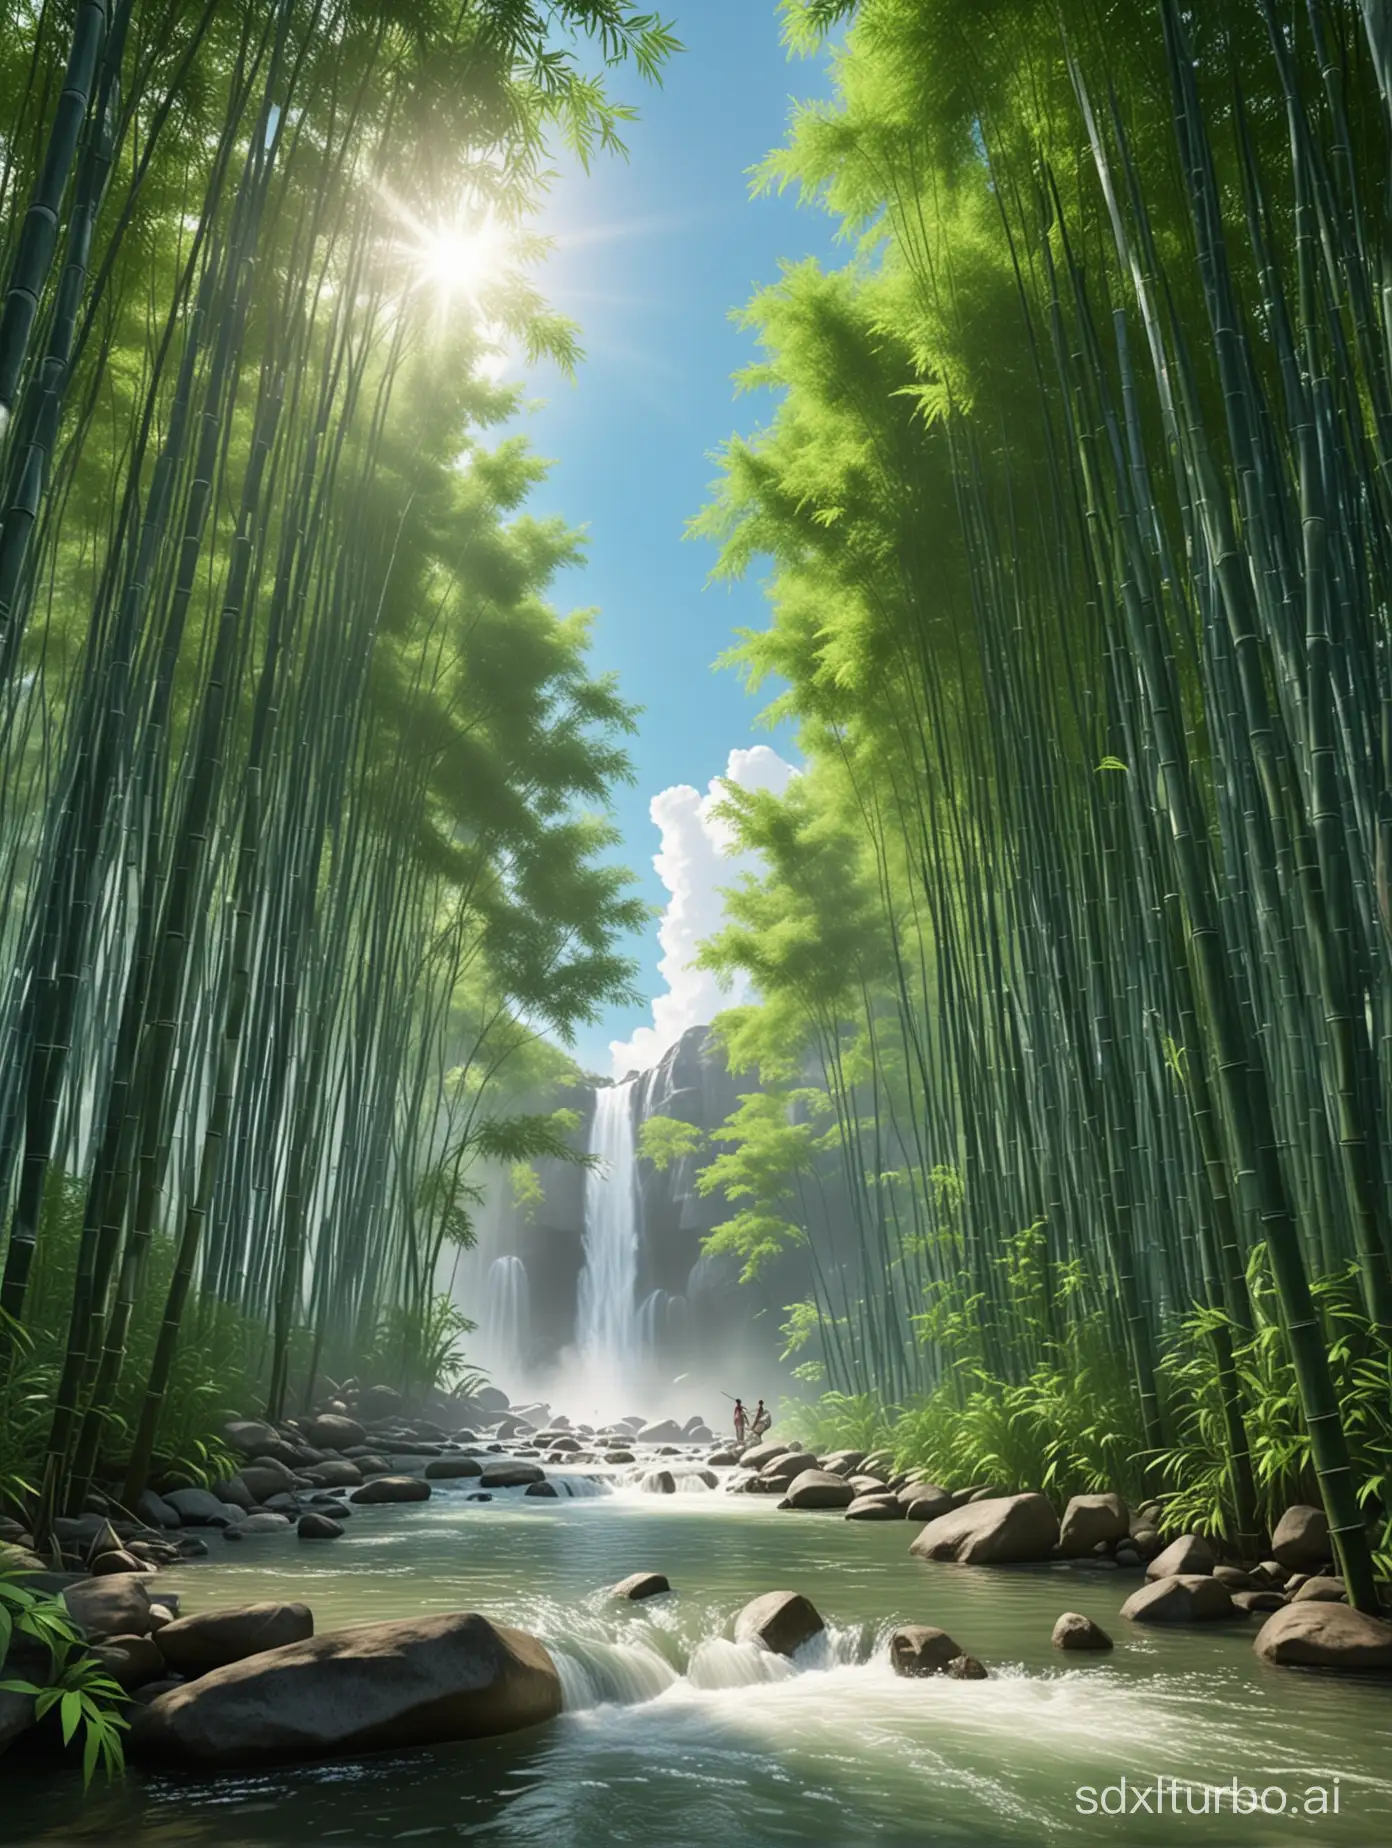 Tranquil-Bamboo-Forest-with-Cascading-Waterfall-and-Clear-Lake